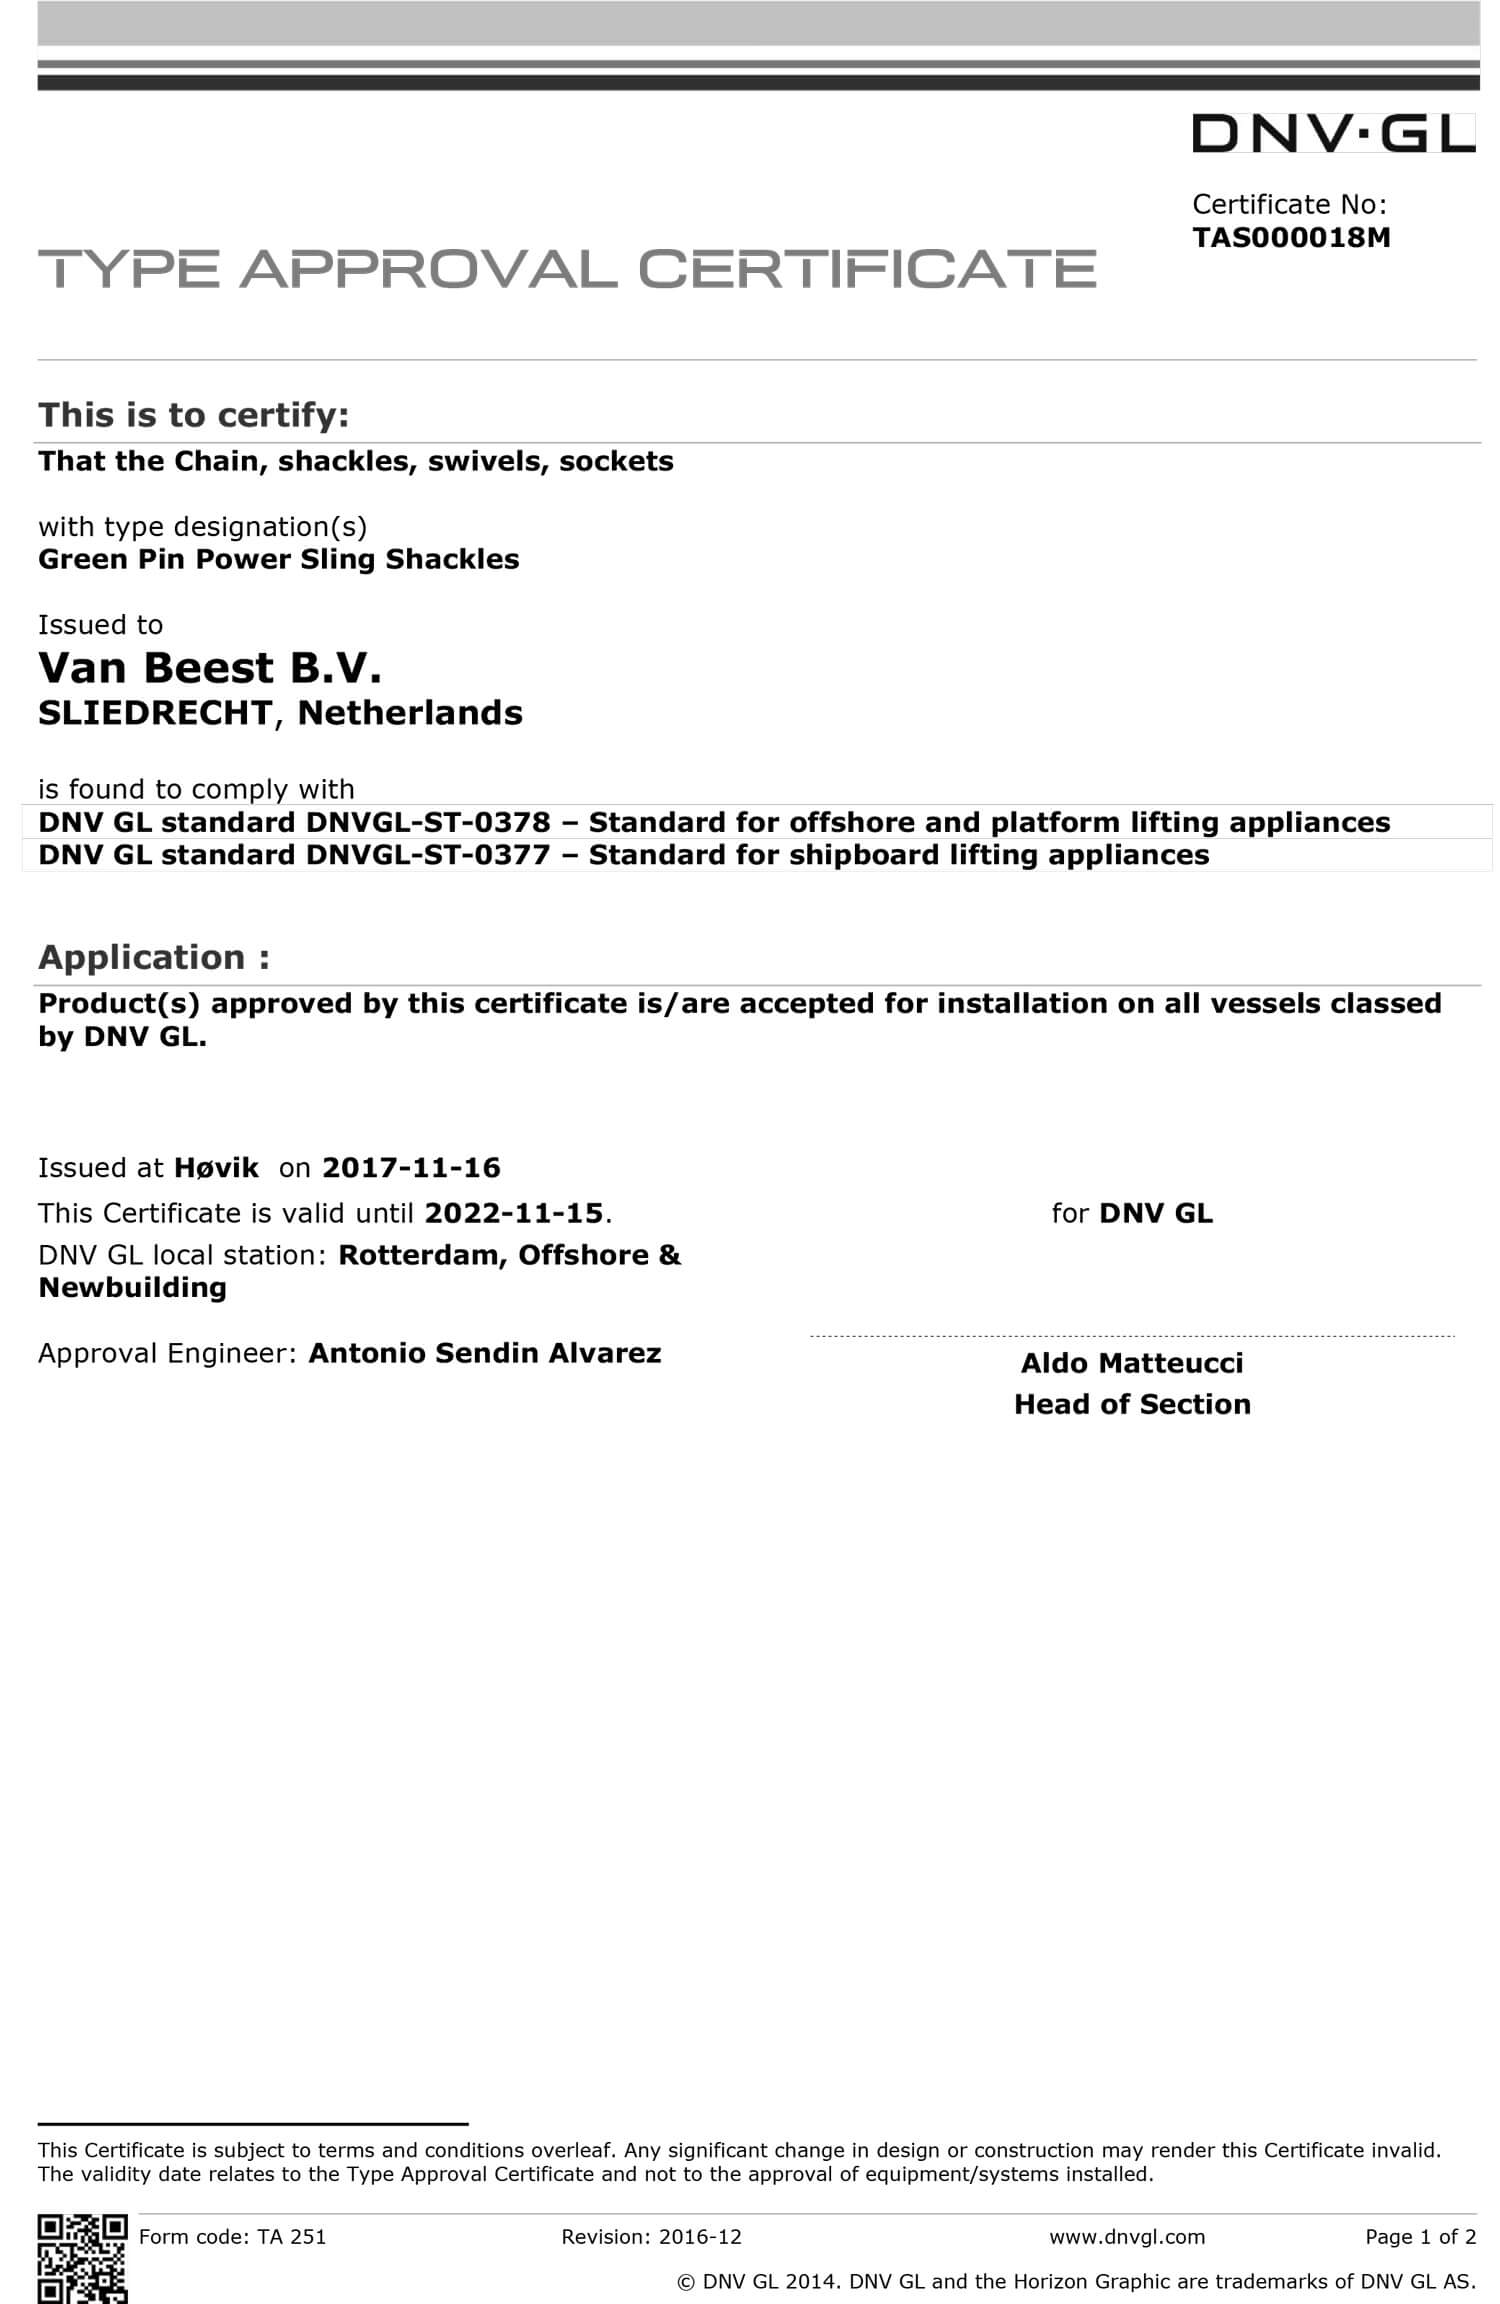 Green Pin DNV certificate page 1